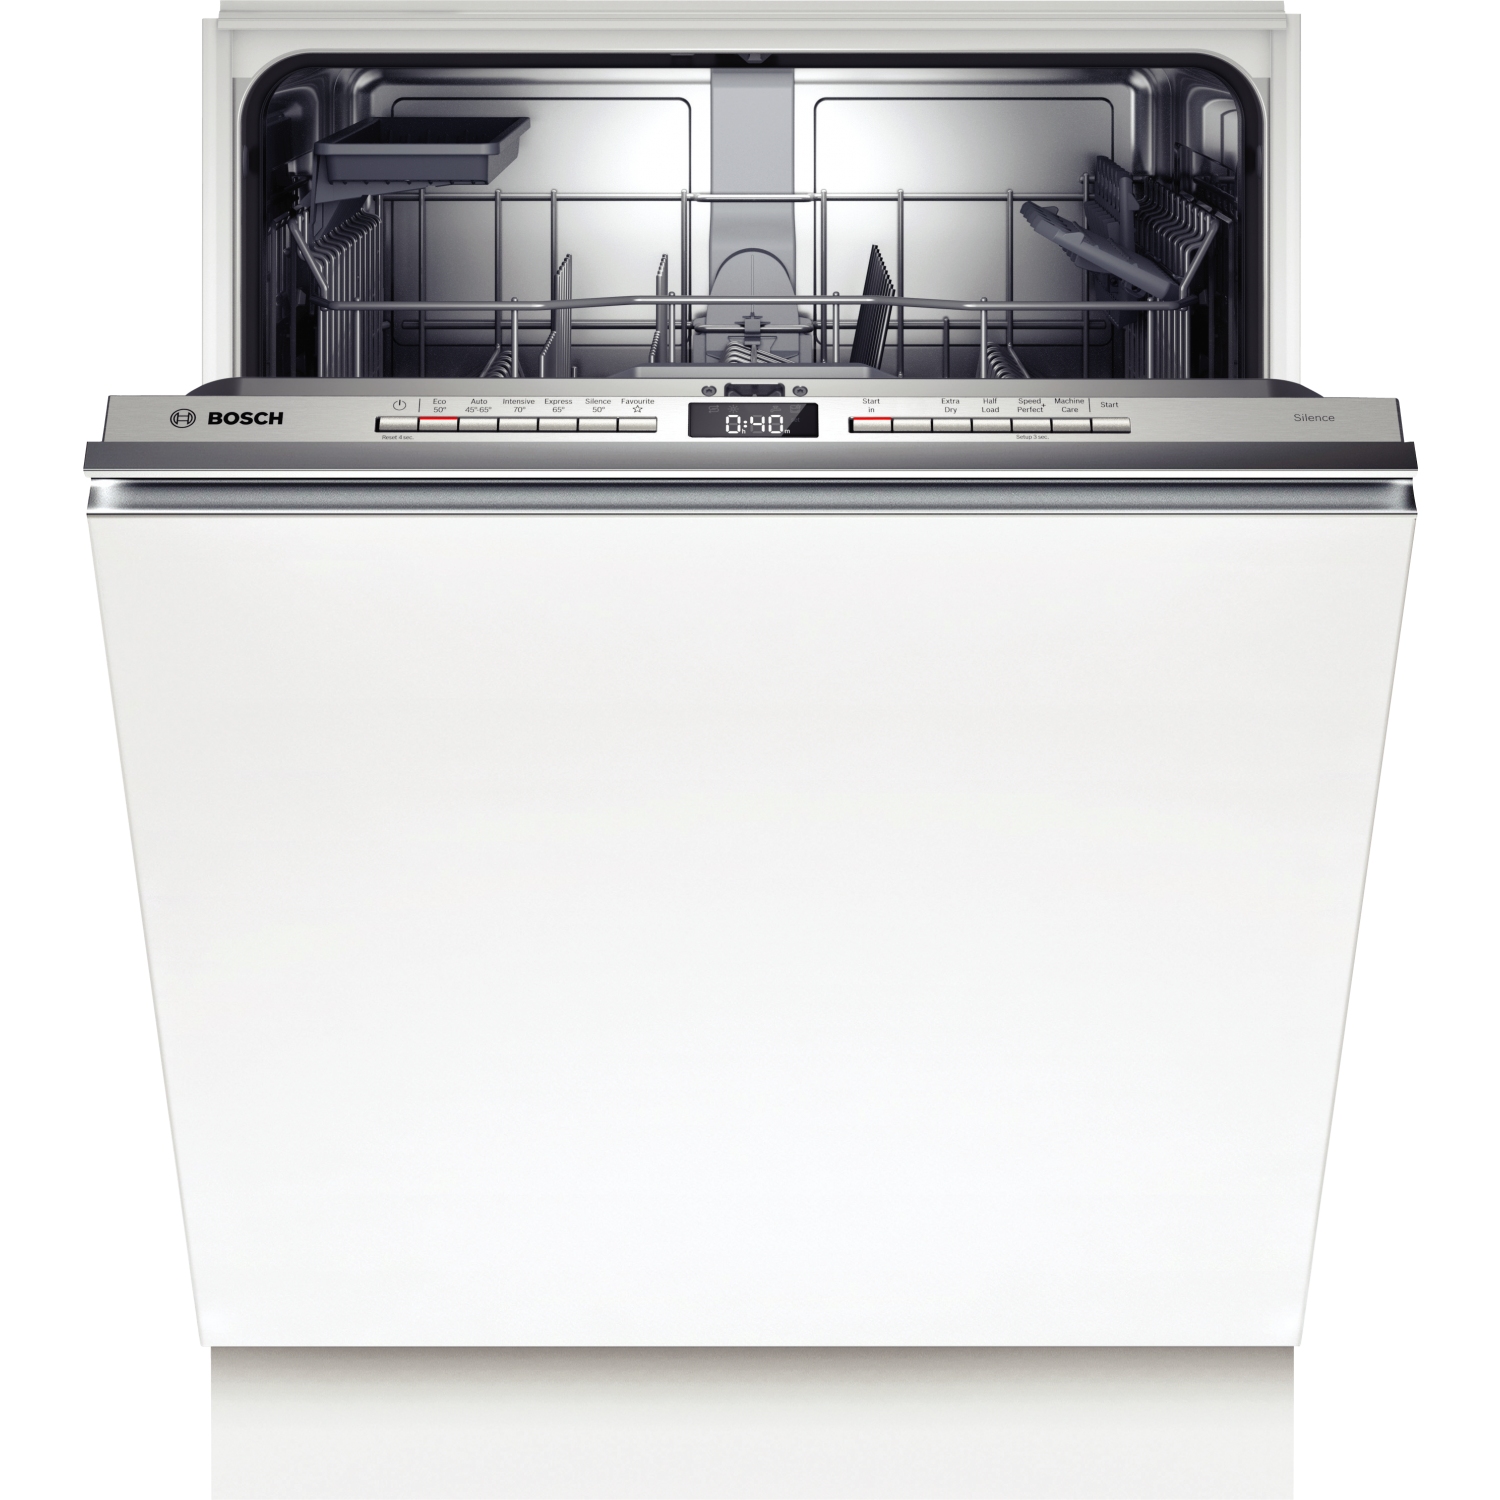 Bosch SGV4HAX40G Full Size Built-In Dishwasher - Steel - 13 Place Settings - 0